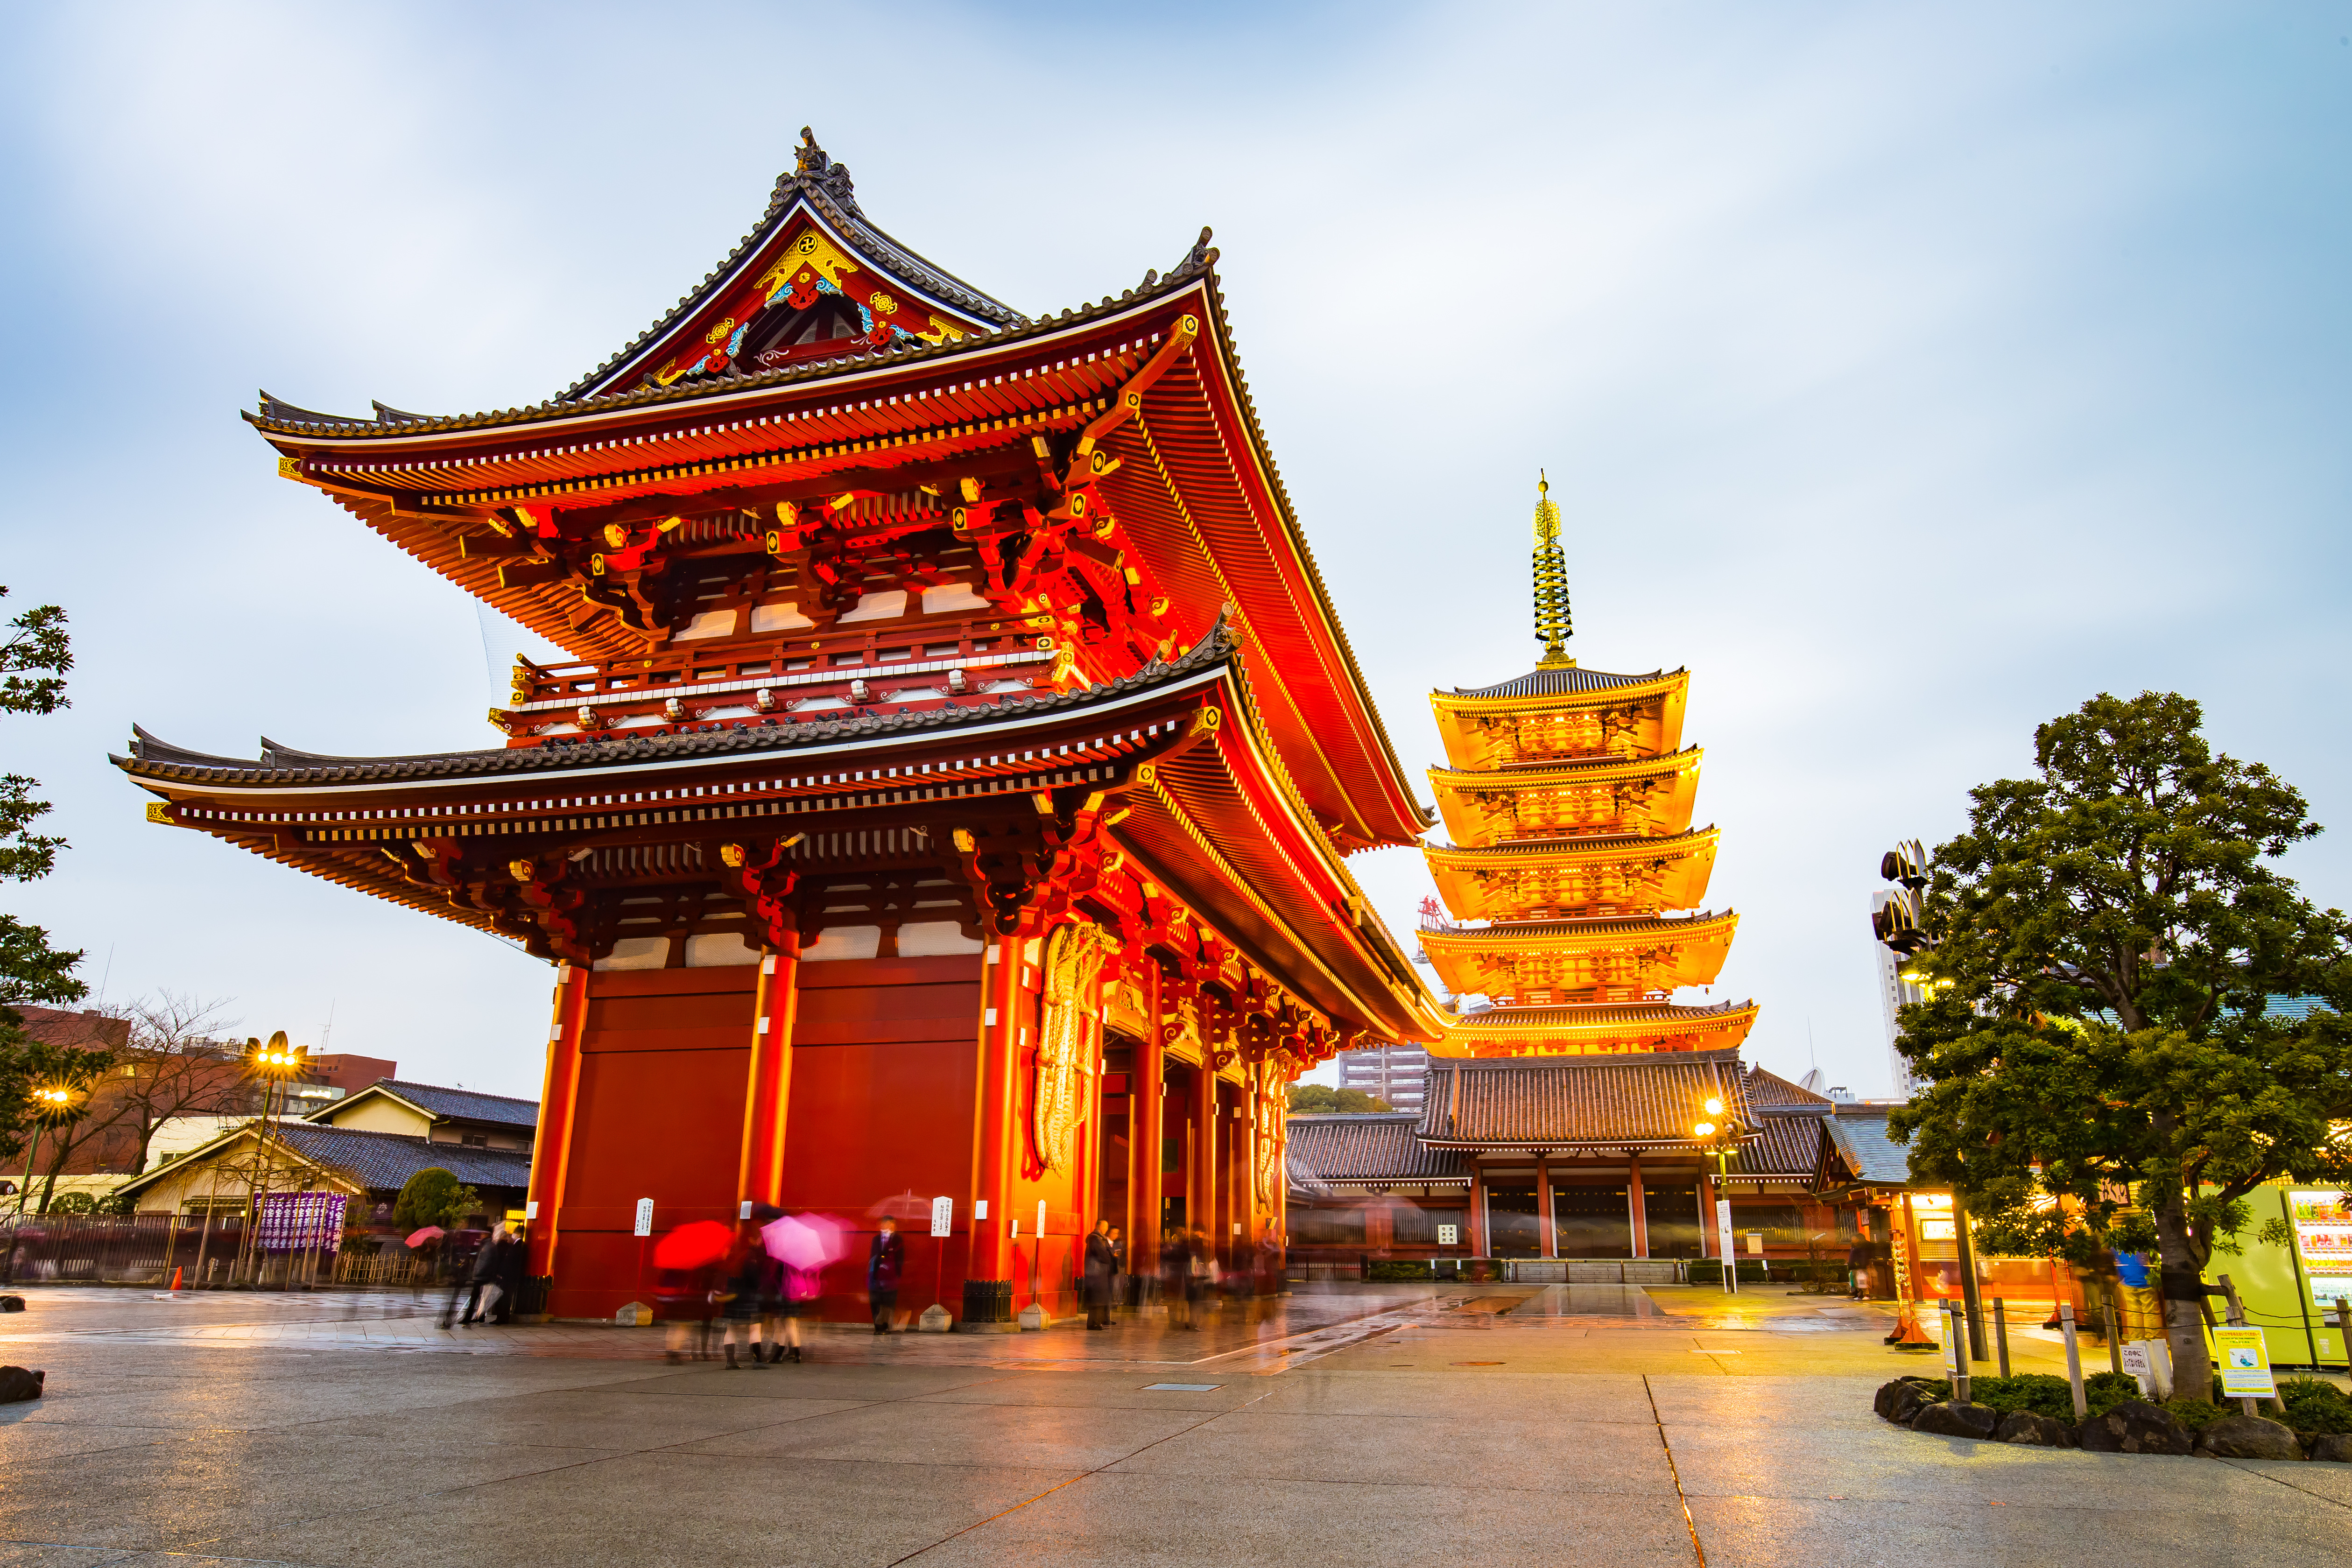 Tokyo, Japan - February 17, 2015: Senso-ji is an ancient Buddhist temple located in Asakusa, Tokyo, Japan. It is Tokyo's oldest temple, and one of its most significant. Formerly associated with the Tendai sect of Buddhism, it became independent after World War II.